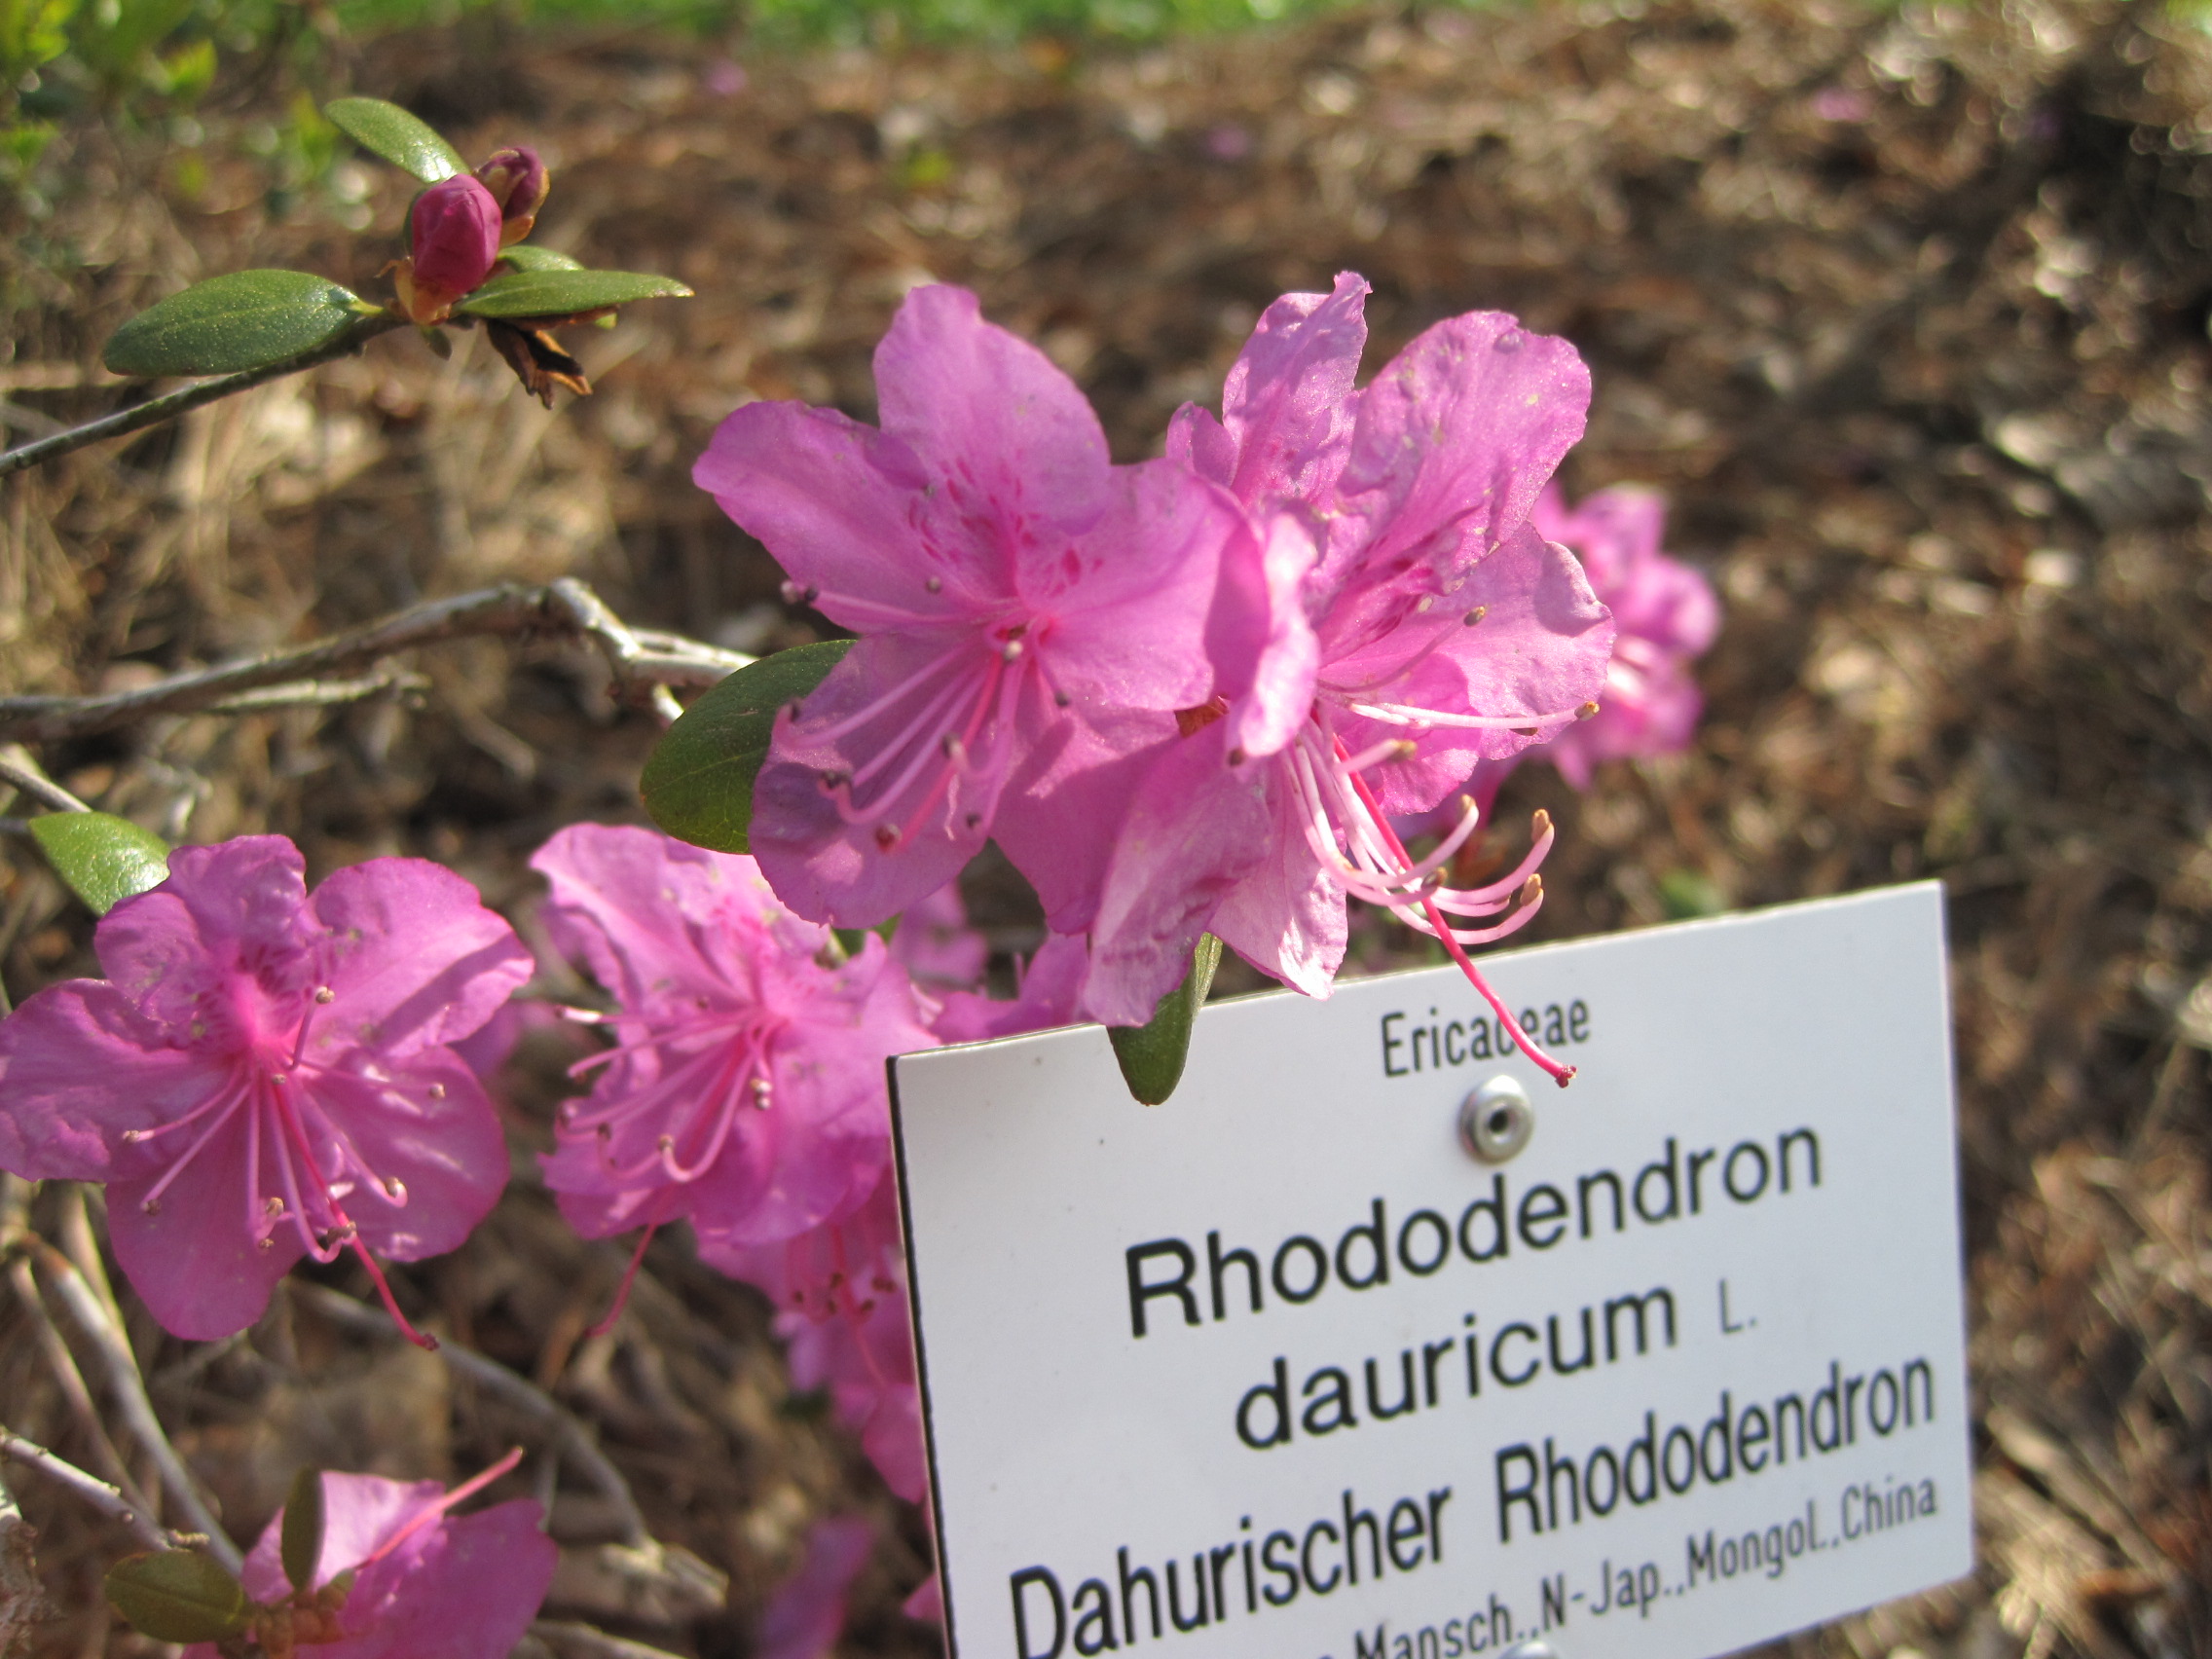 view image: Rhododendron dauricum L.